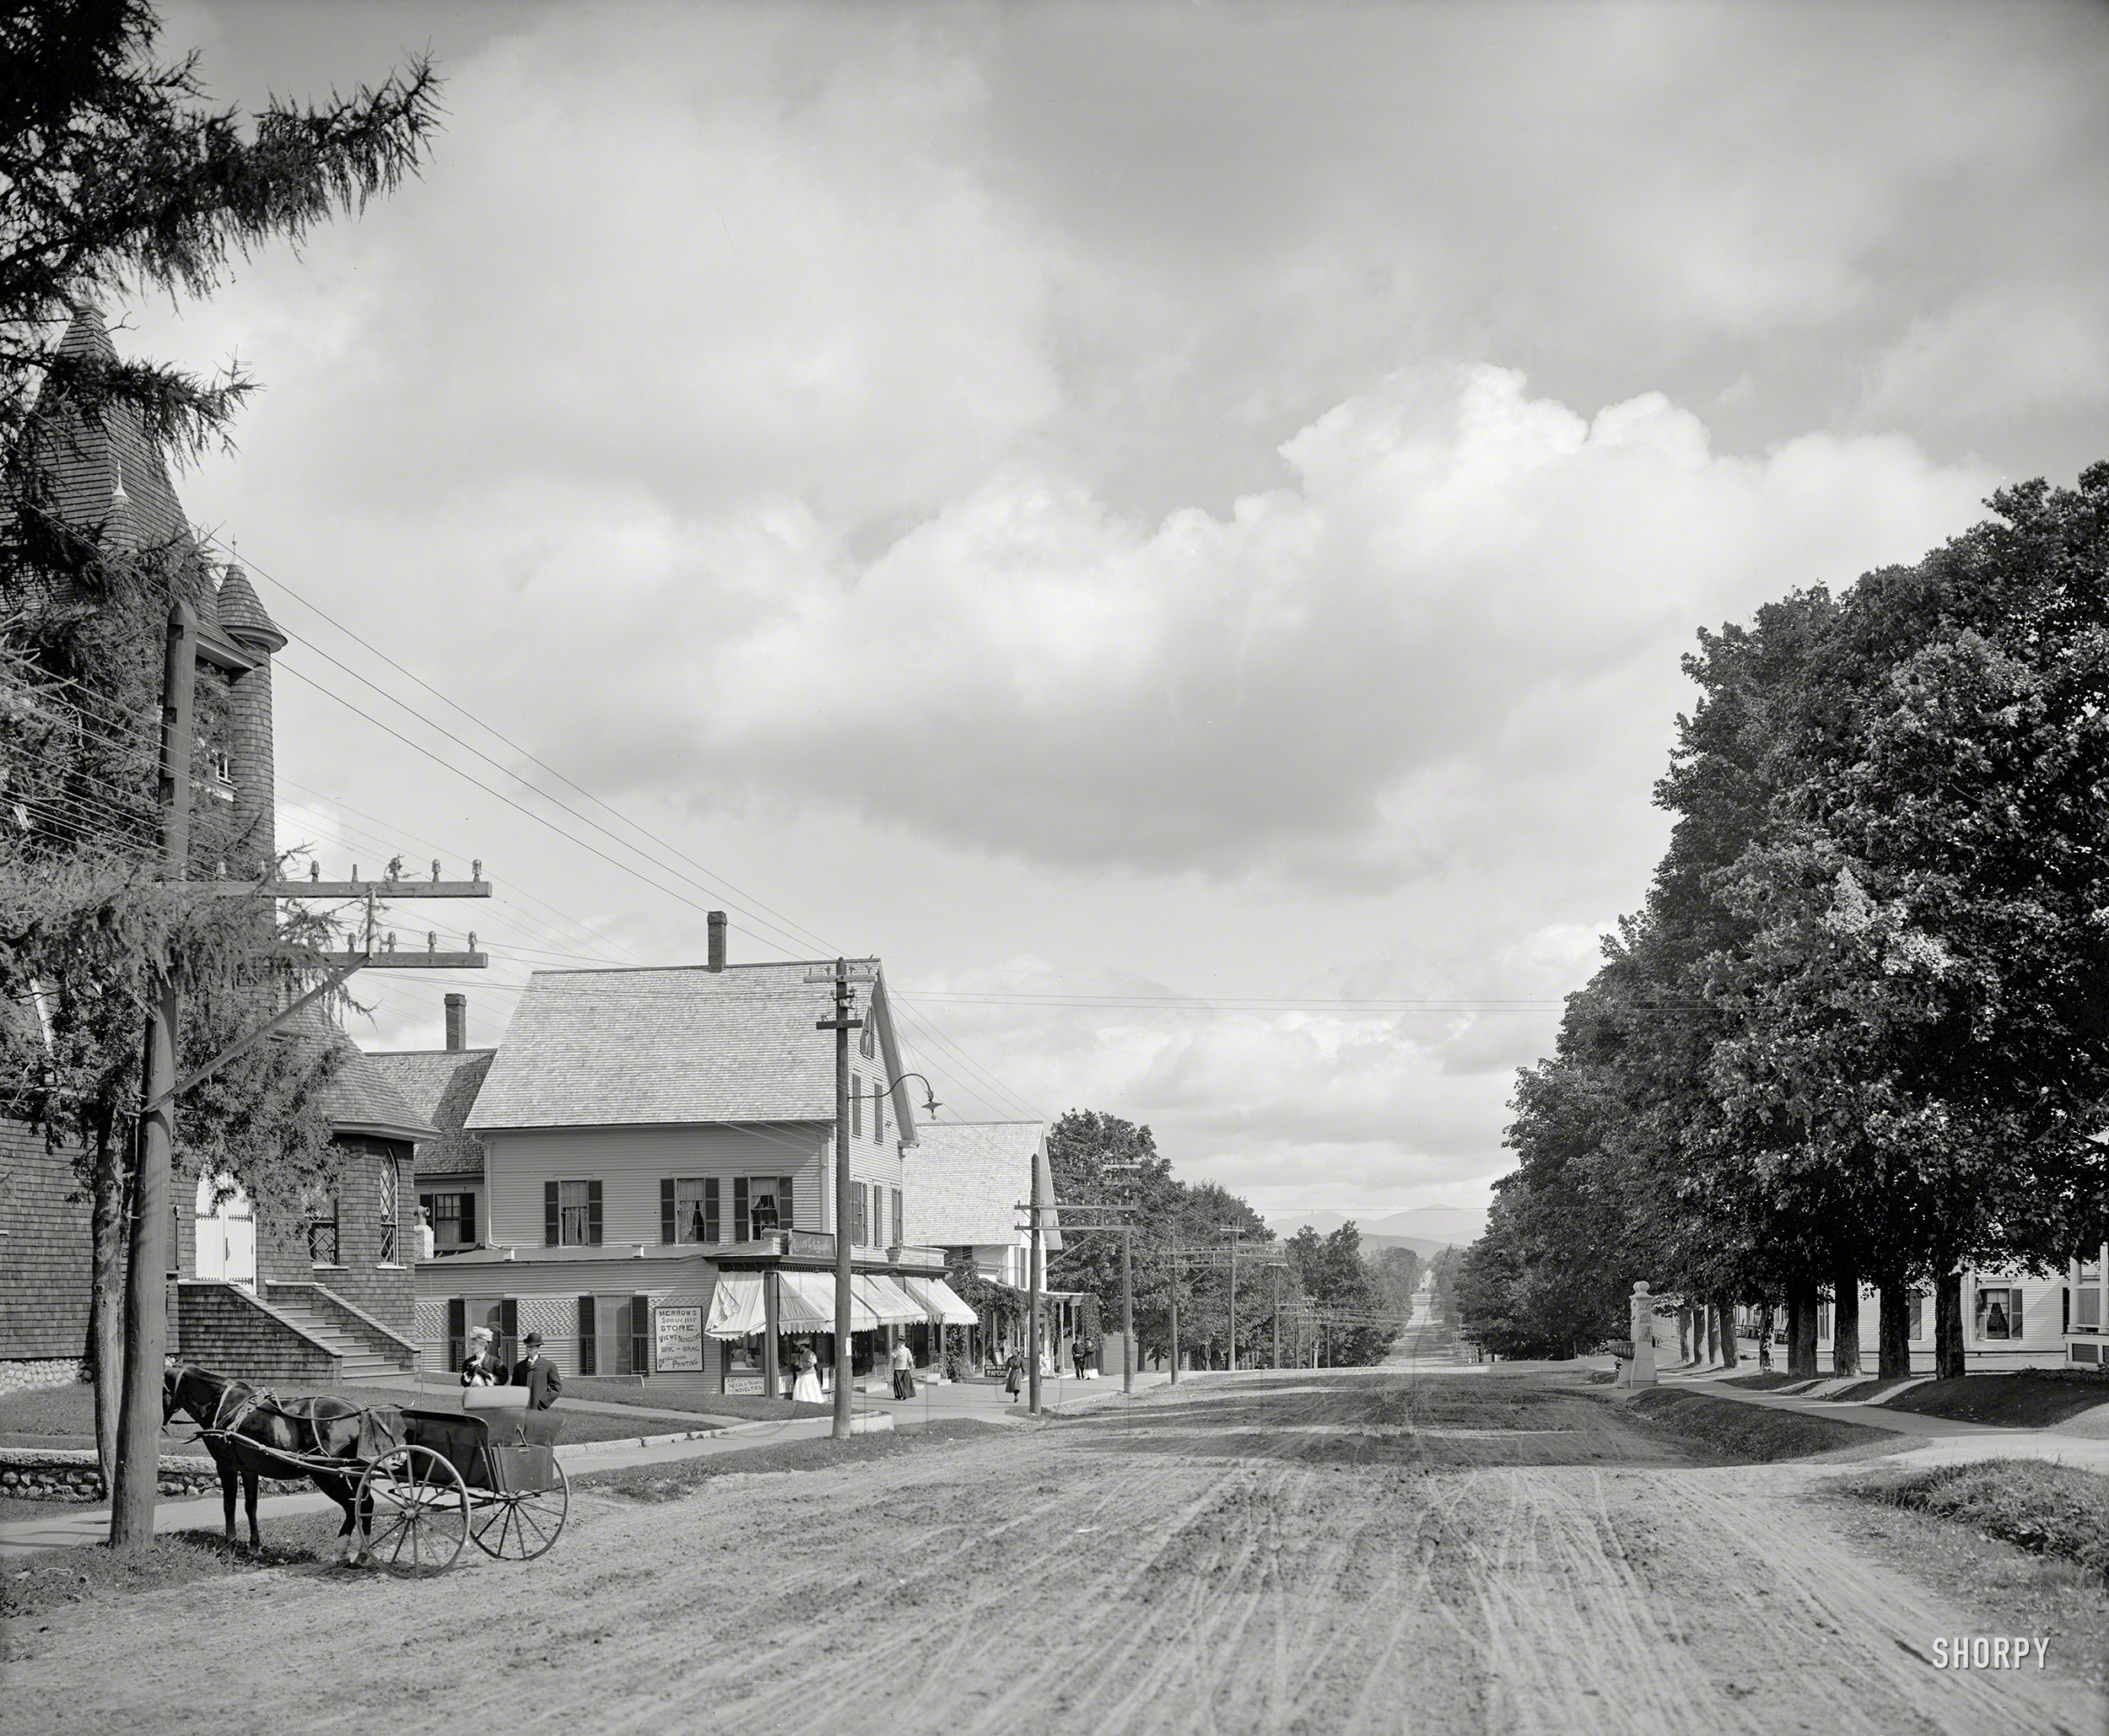 Circa 1907. "Bethlehem Street looking east. Bethlehem, White Mountains, New Hampshire." Continuing our visit to the Granite State we pause at Merrow's Souvenir Store and photography studio, dealer in Views, Novelties and "Bric-Brac." 8x10 inch glass negative. View full size.